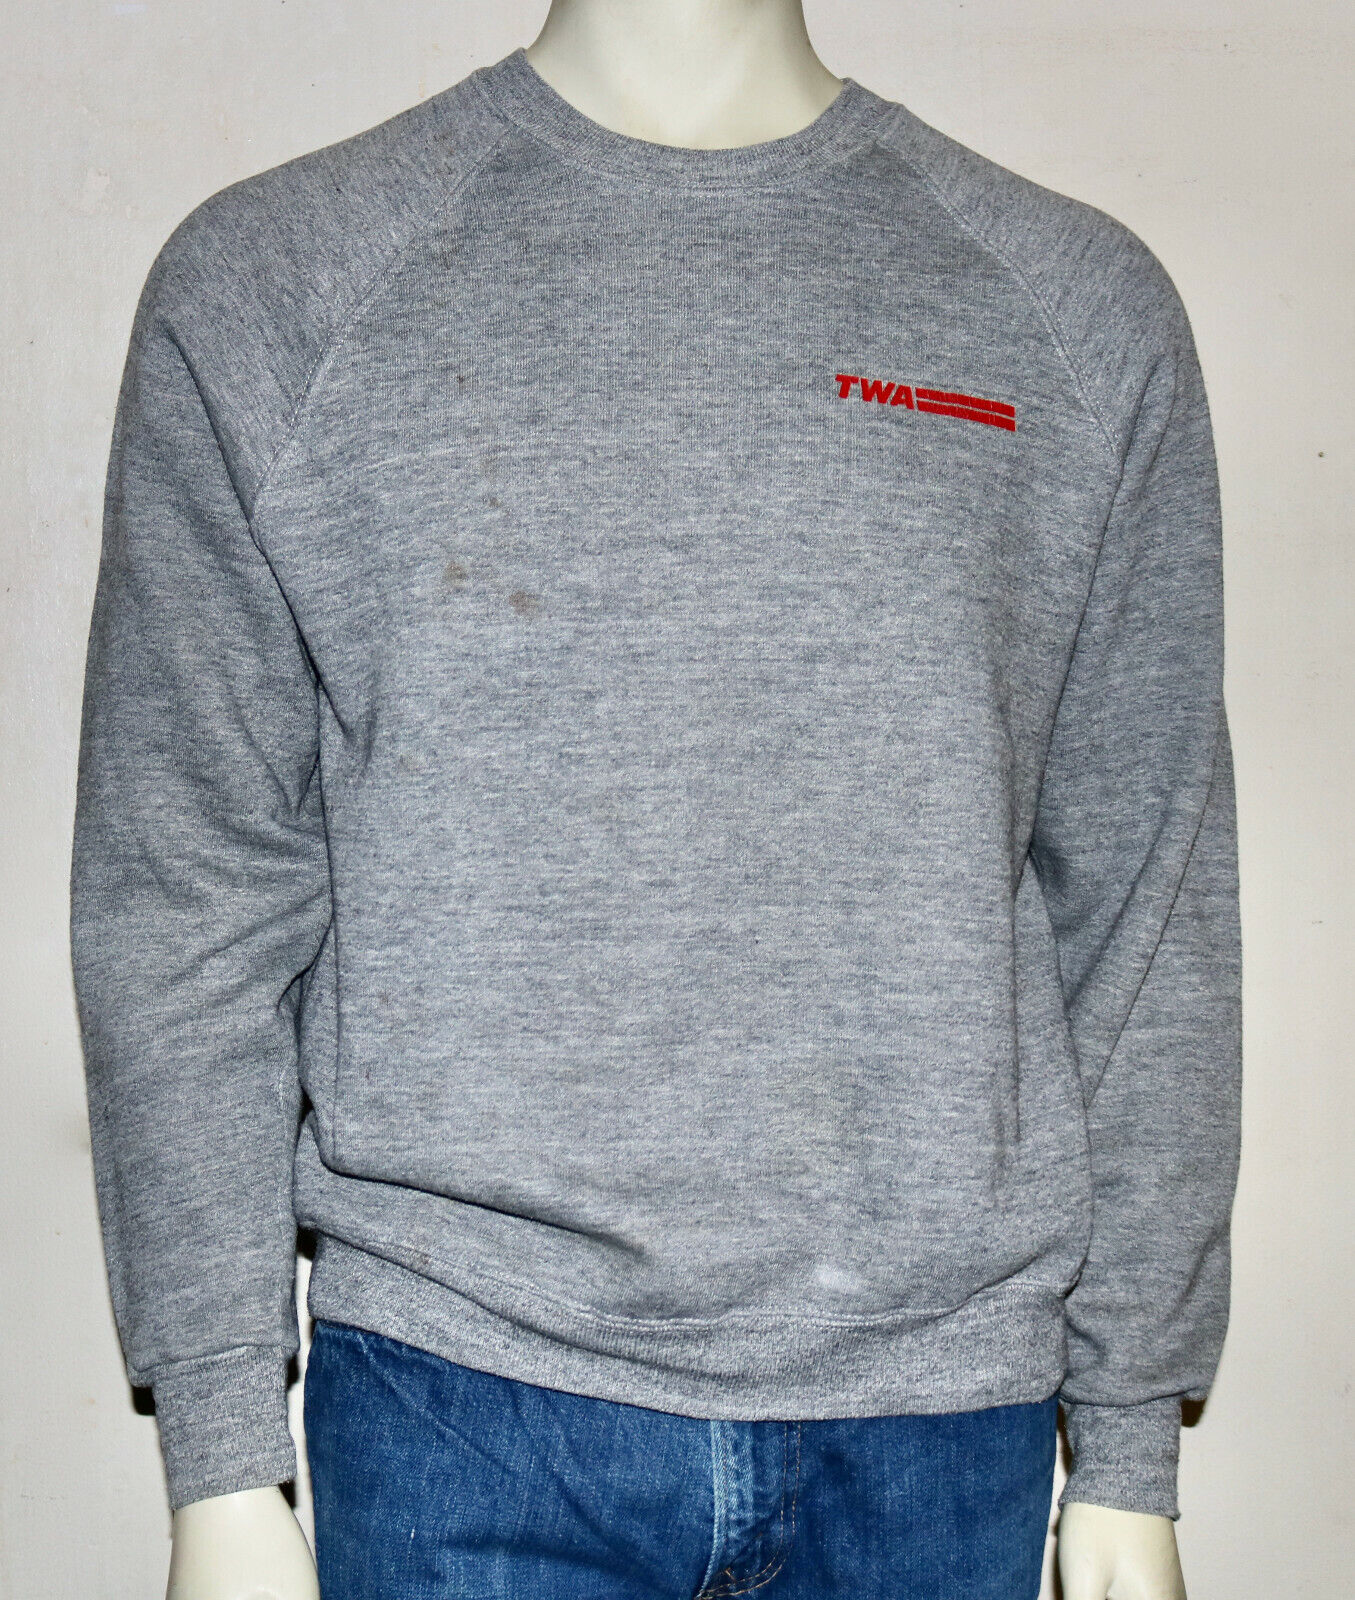 Trans World Airlines TWA vintage sweatshirt and them song record set